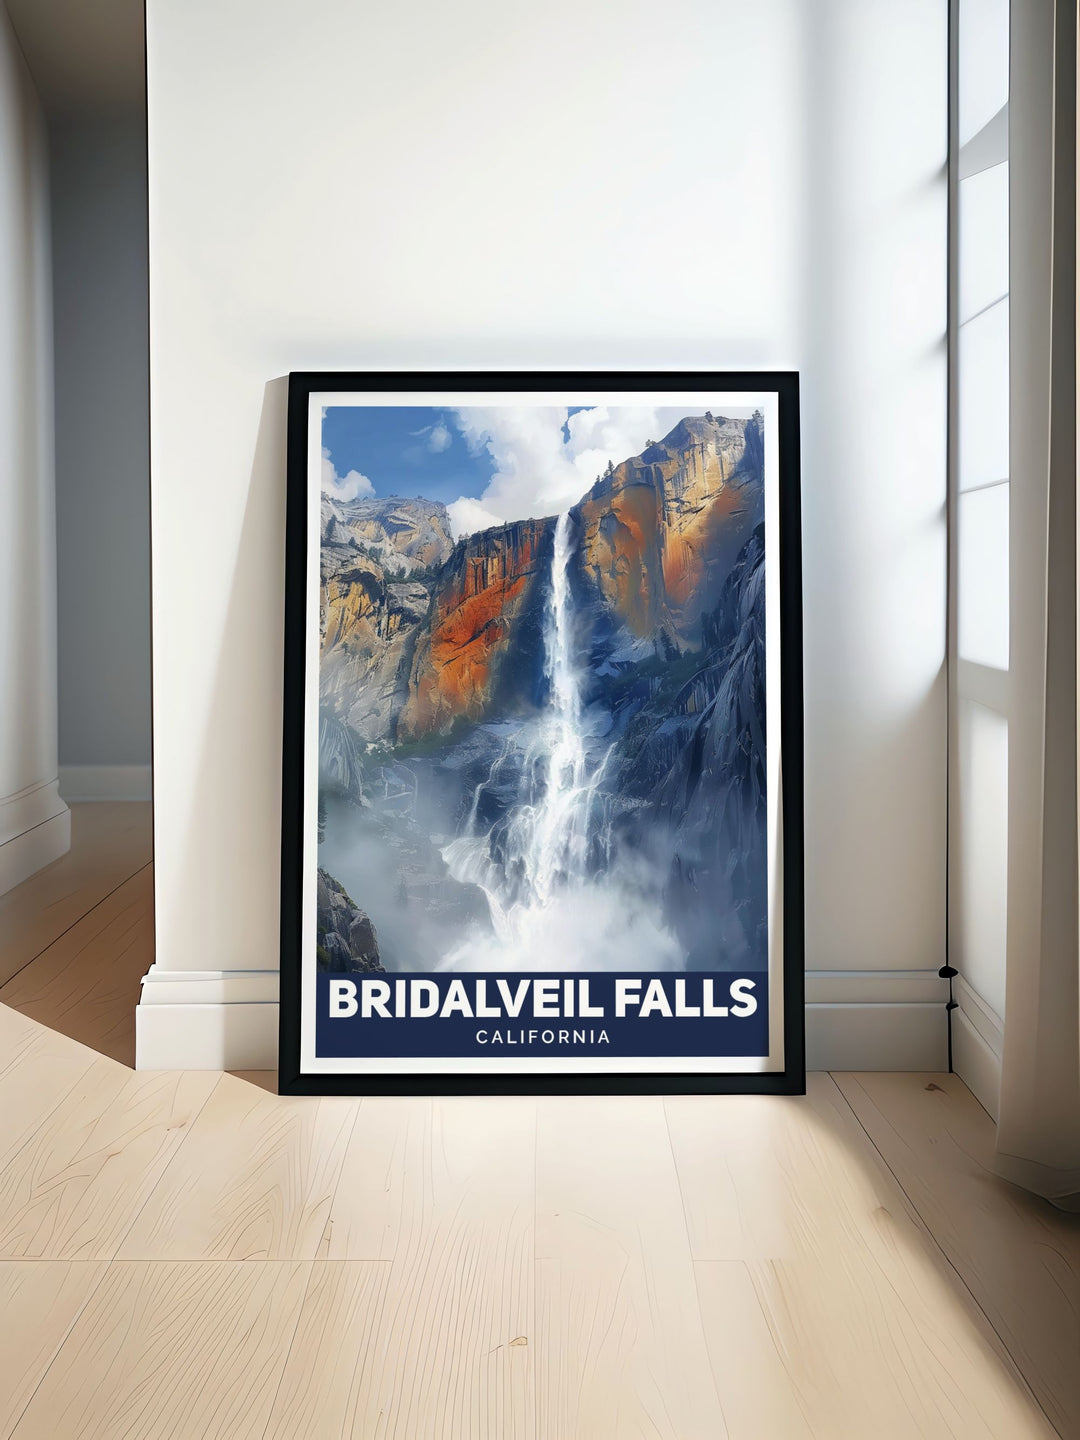 Closeup of Bridalveil Falls in Yosemite National Park captured in a beautiful California art print perfect for nature lovers and travel enthusiasts looking to add a touch of California decor to their home or office space. A stunning addition to any art collection or gift list.